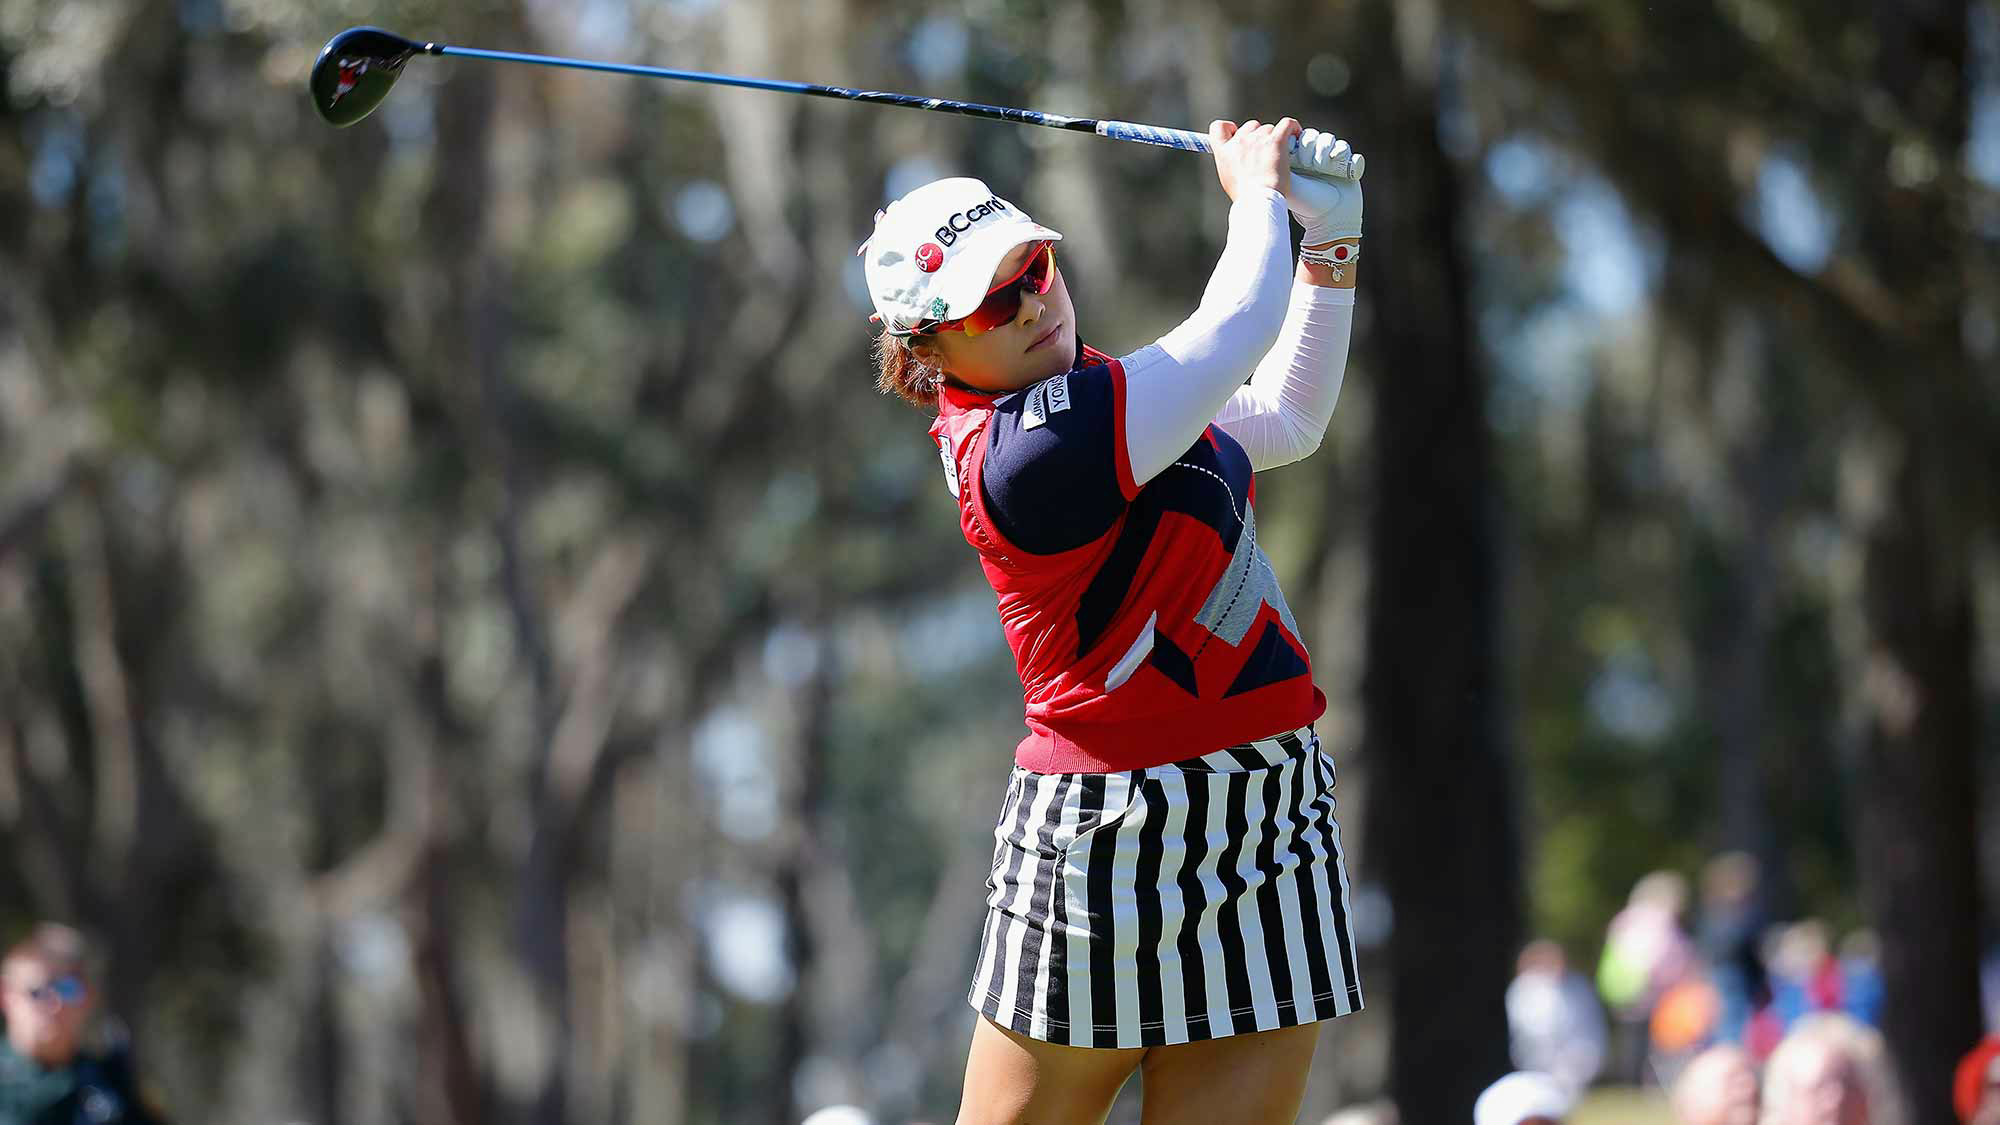 Ha Na Jang during Final Round at the Golden Ocala Golf & Equestrian Club on January 31, 2015 in Ocala, Florida